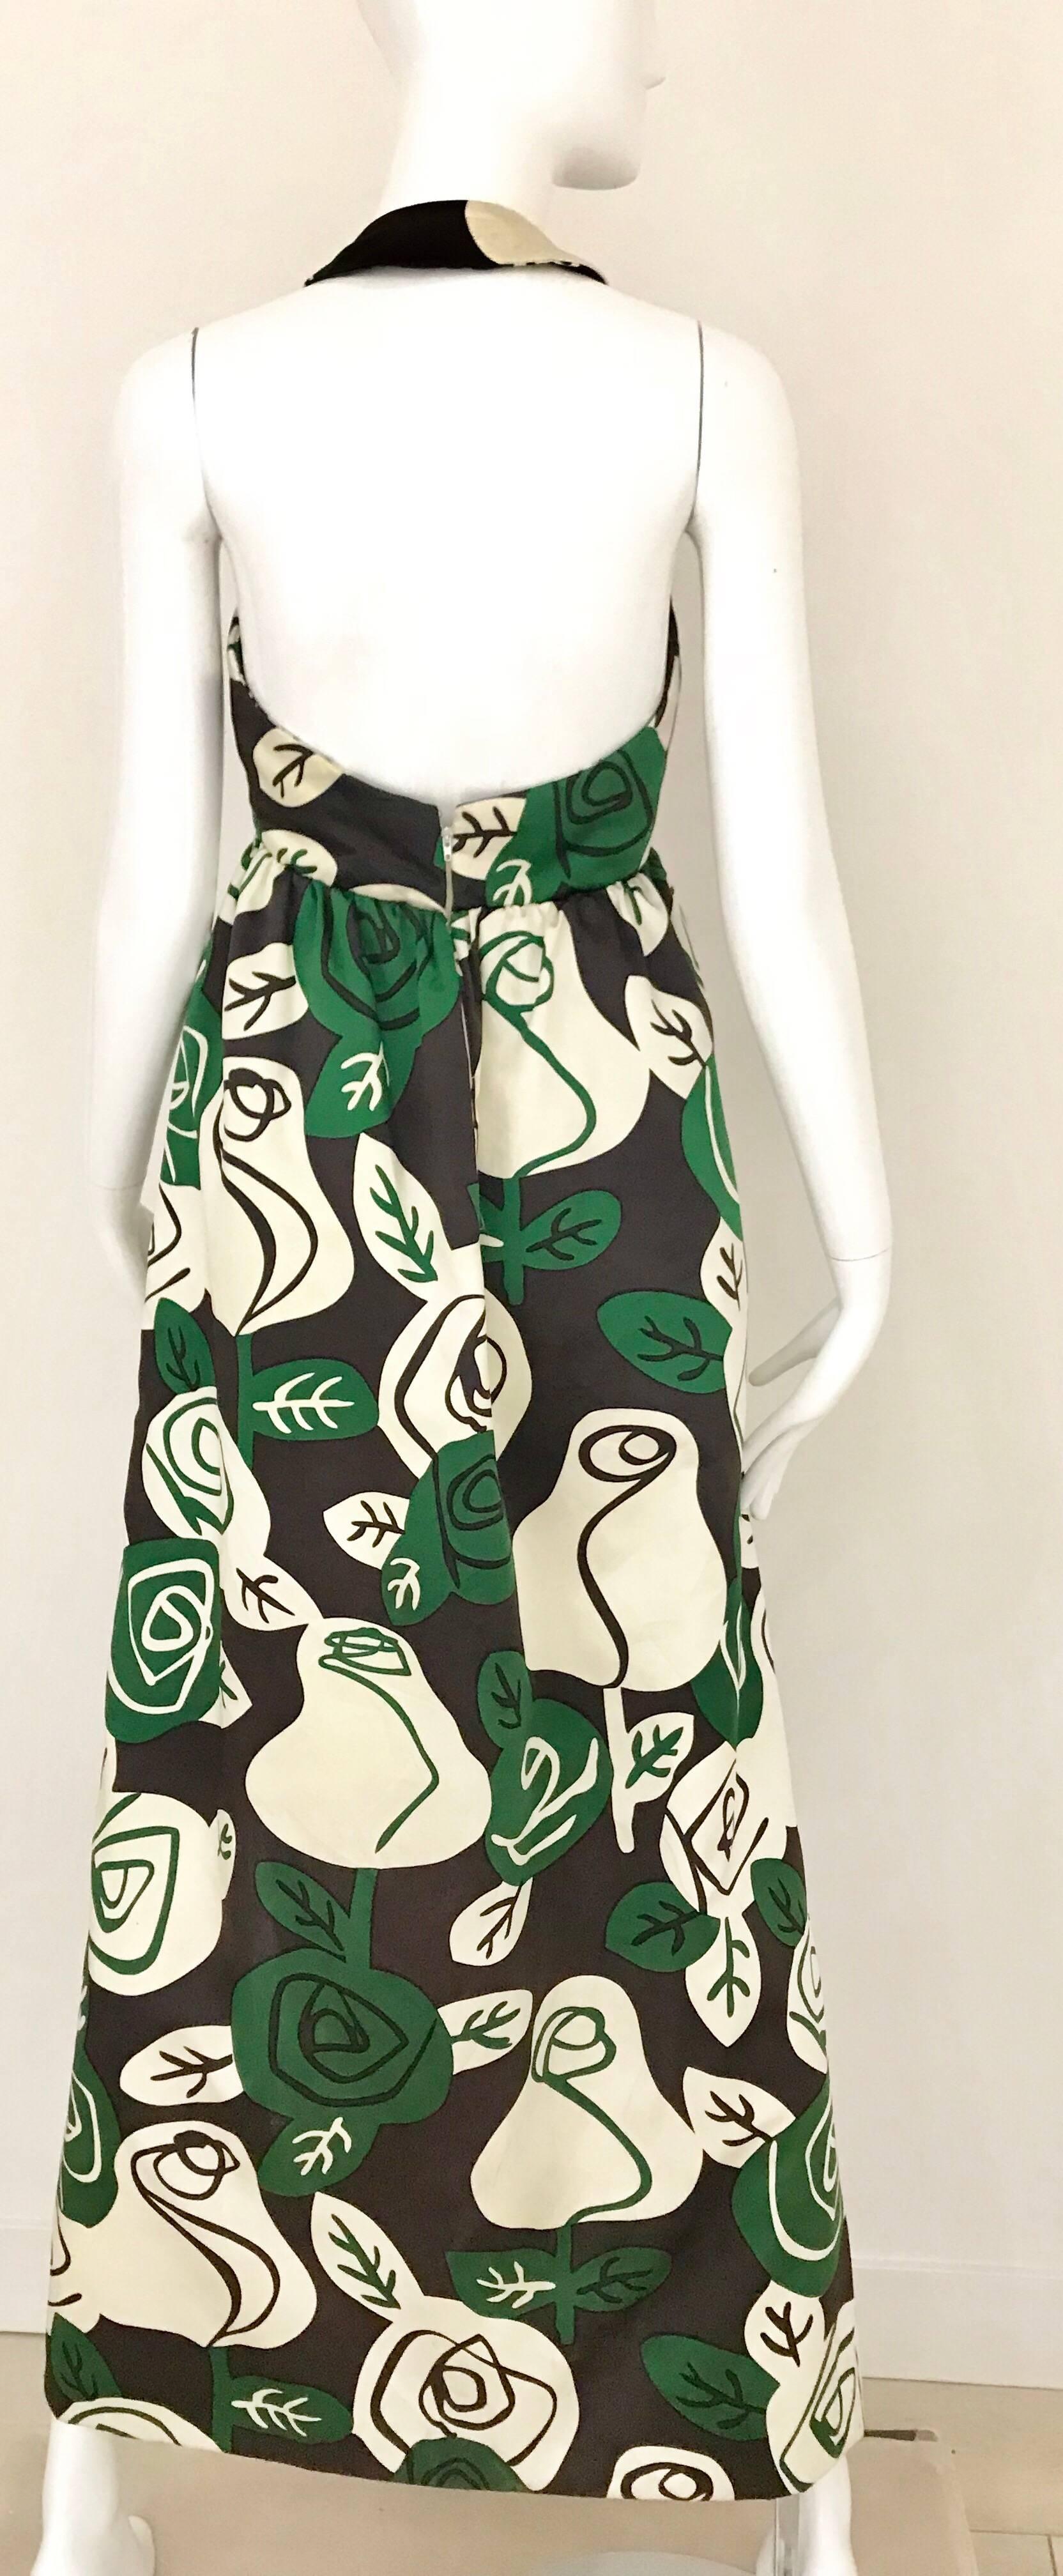 Women's 1960s Geoffrey Beene Green and White Floral Print Sleeveless Maxi Dress with Bow